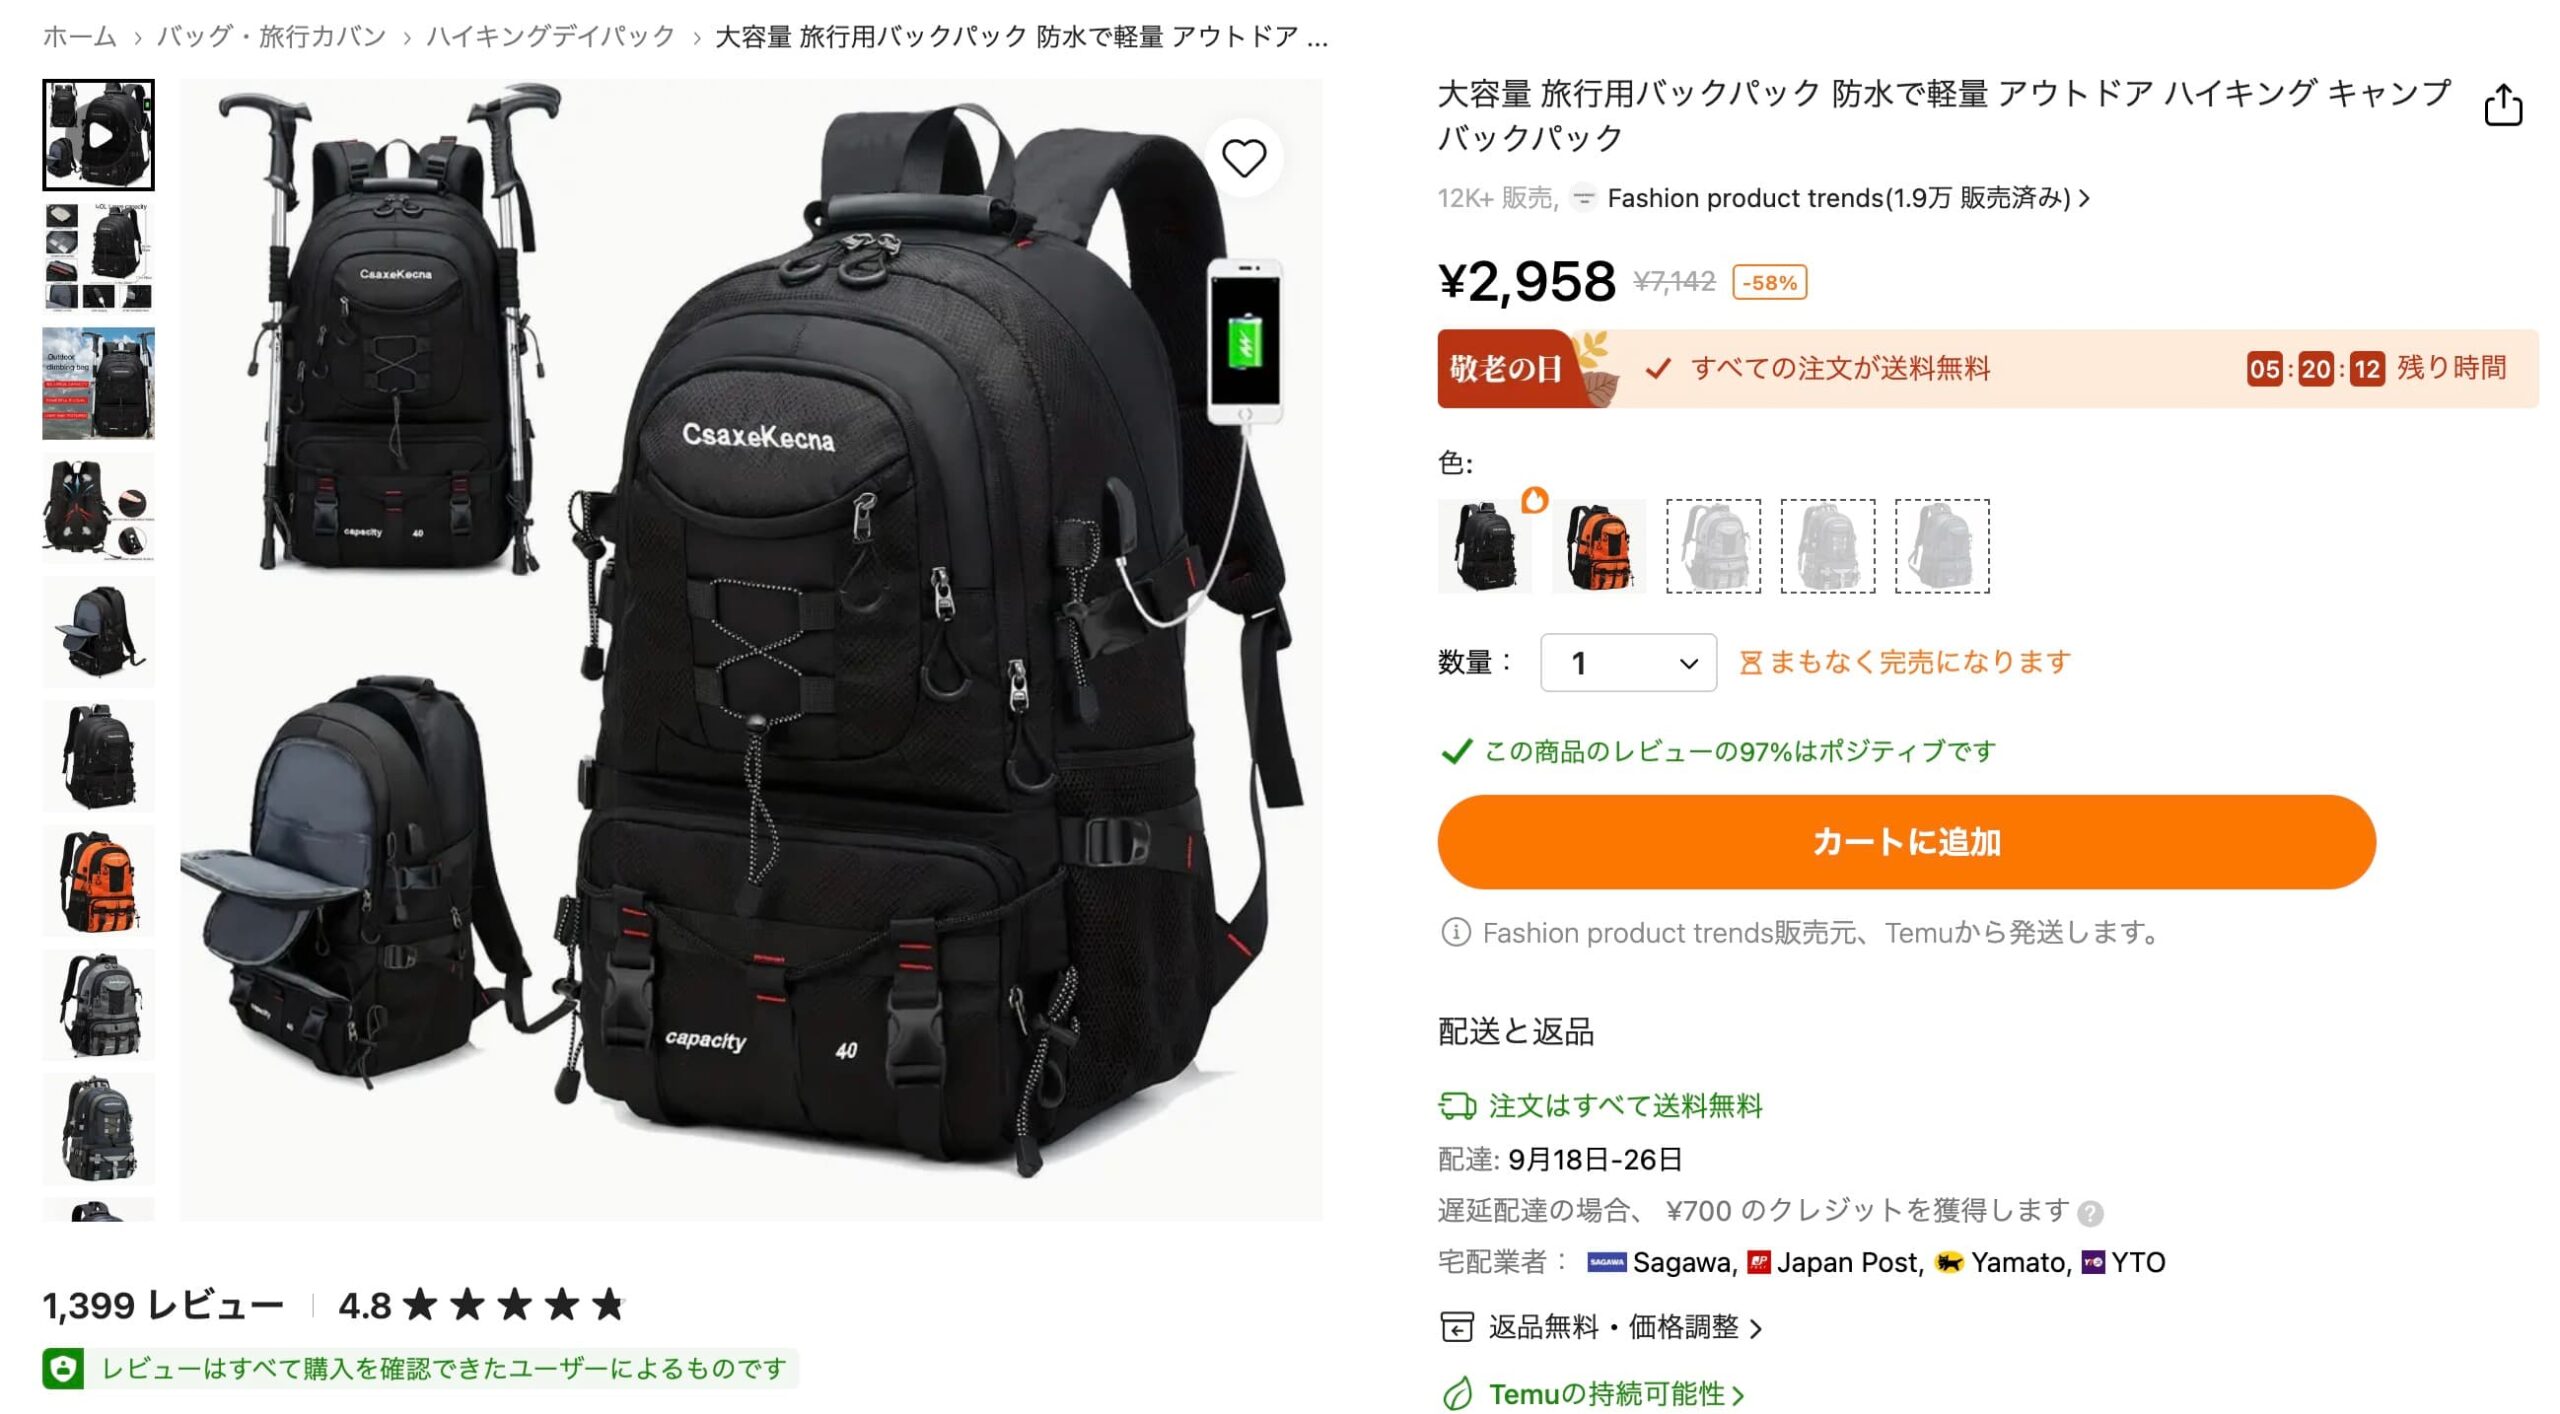 【Fashion product trends】旅行用バックパック